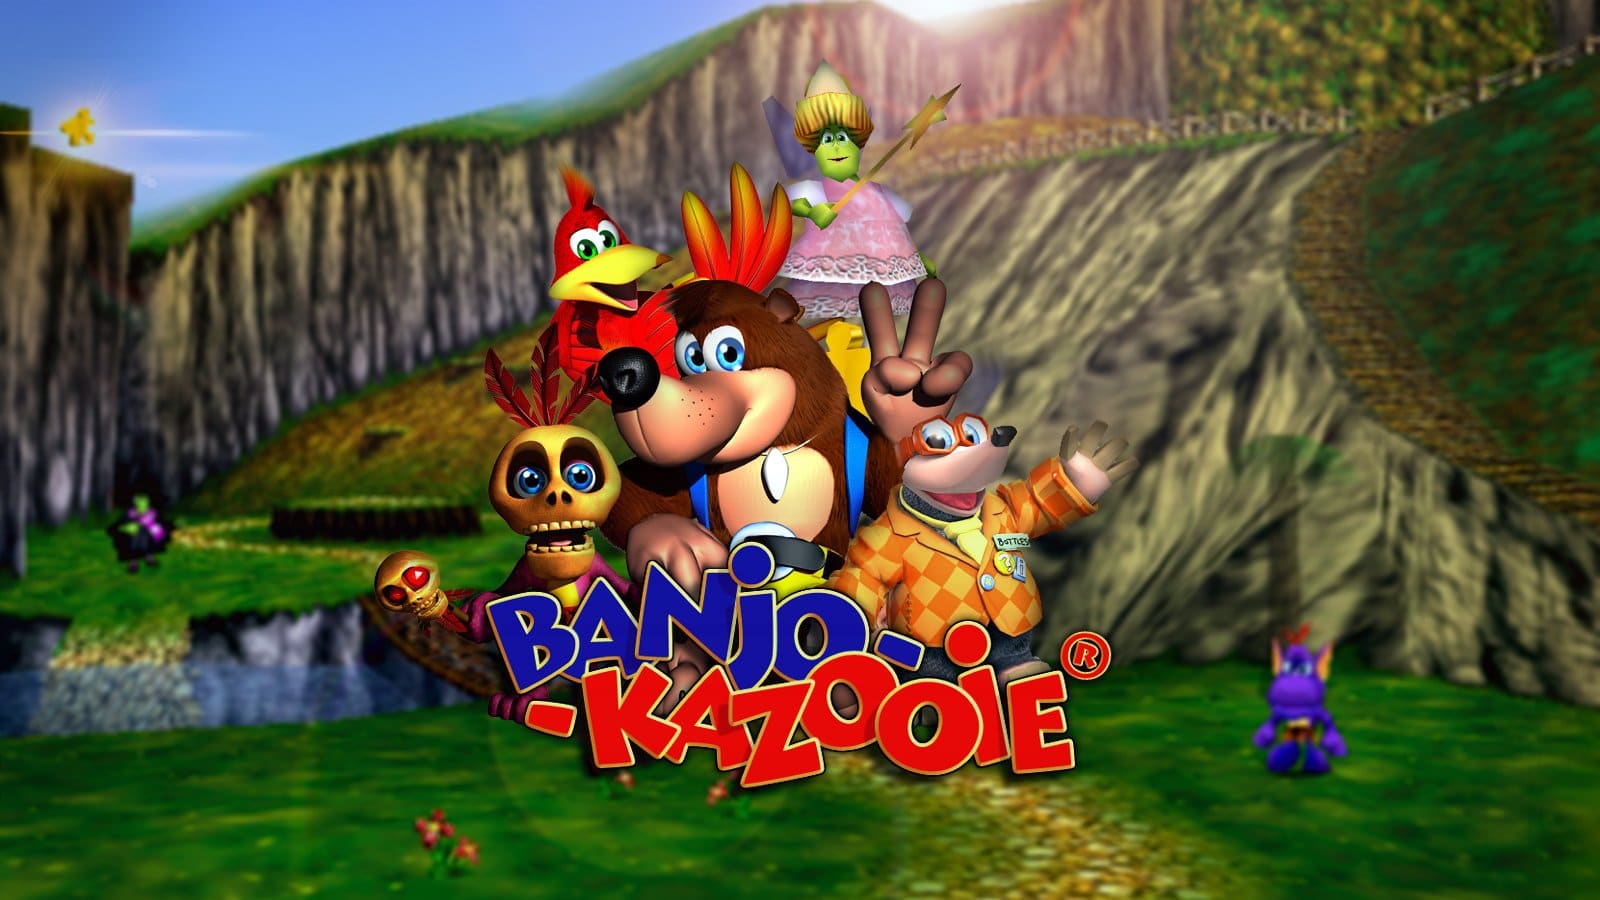 Banjo Kazooie is coming to the Nintendo Switch Online + Expansion Pack in January